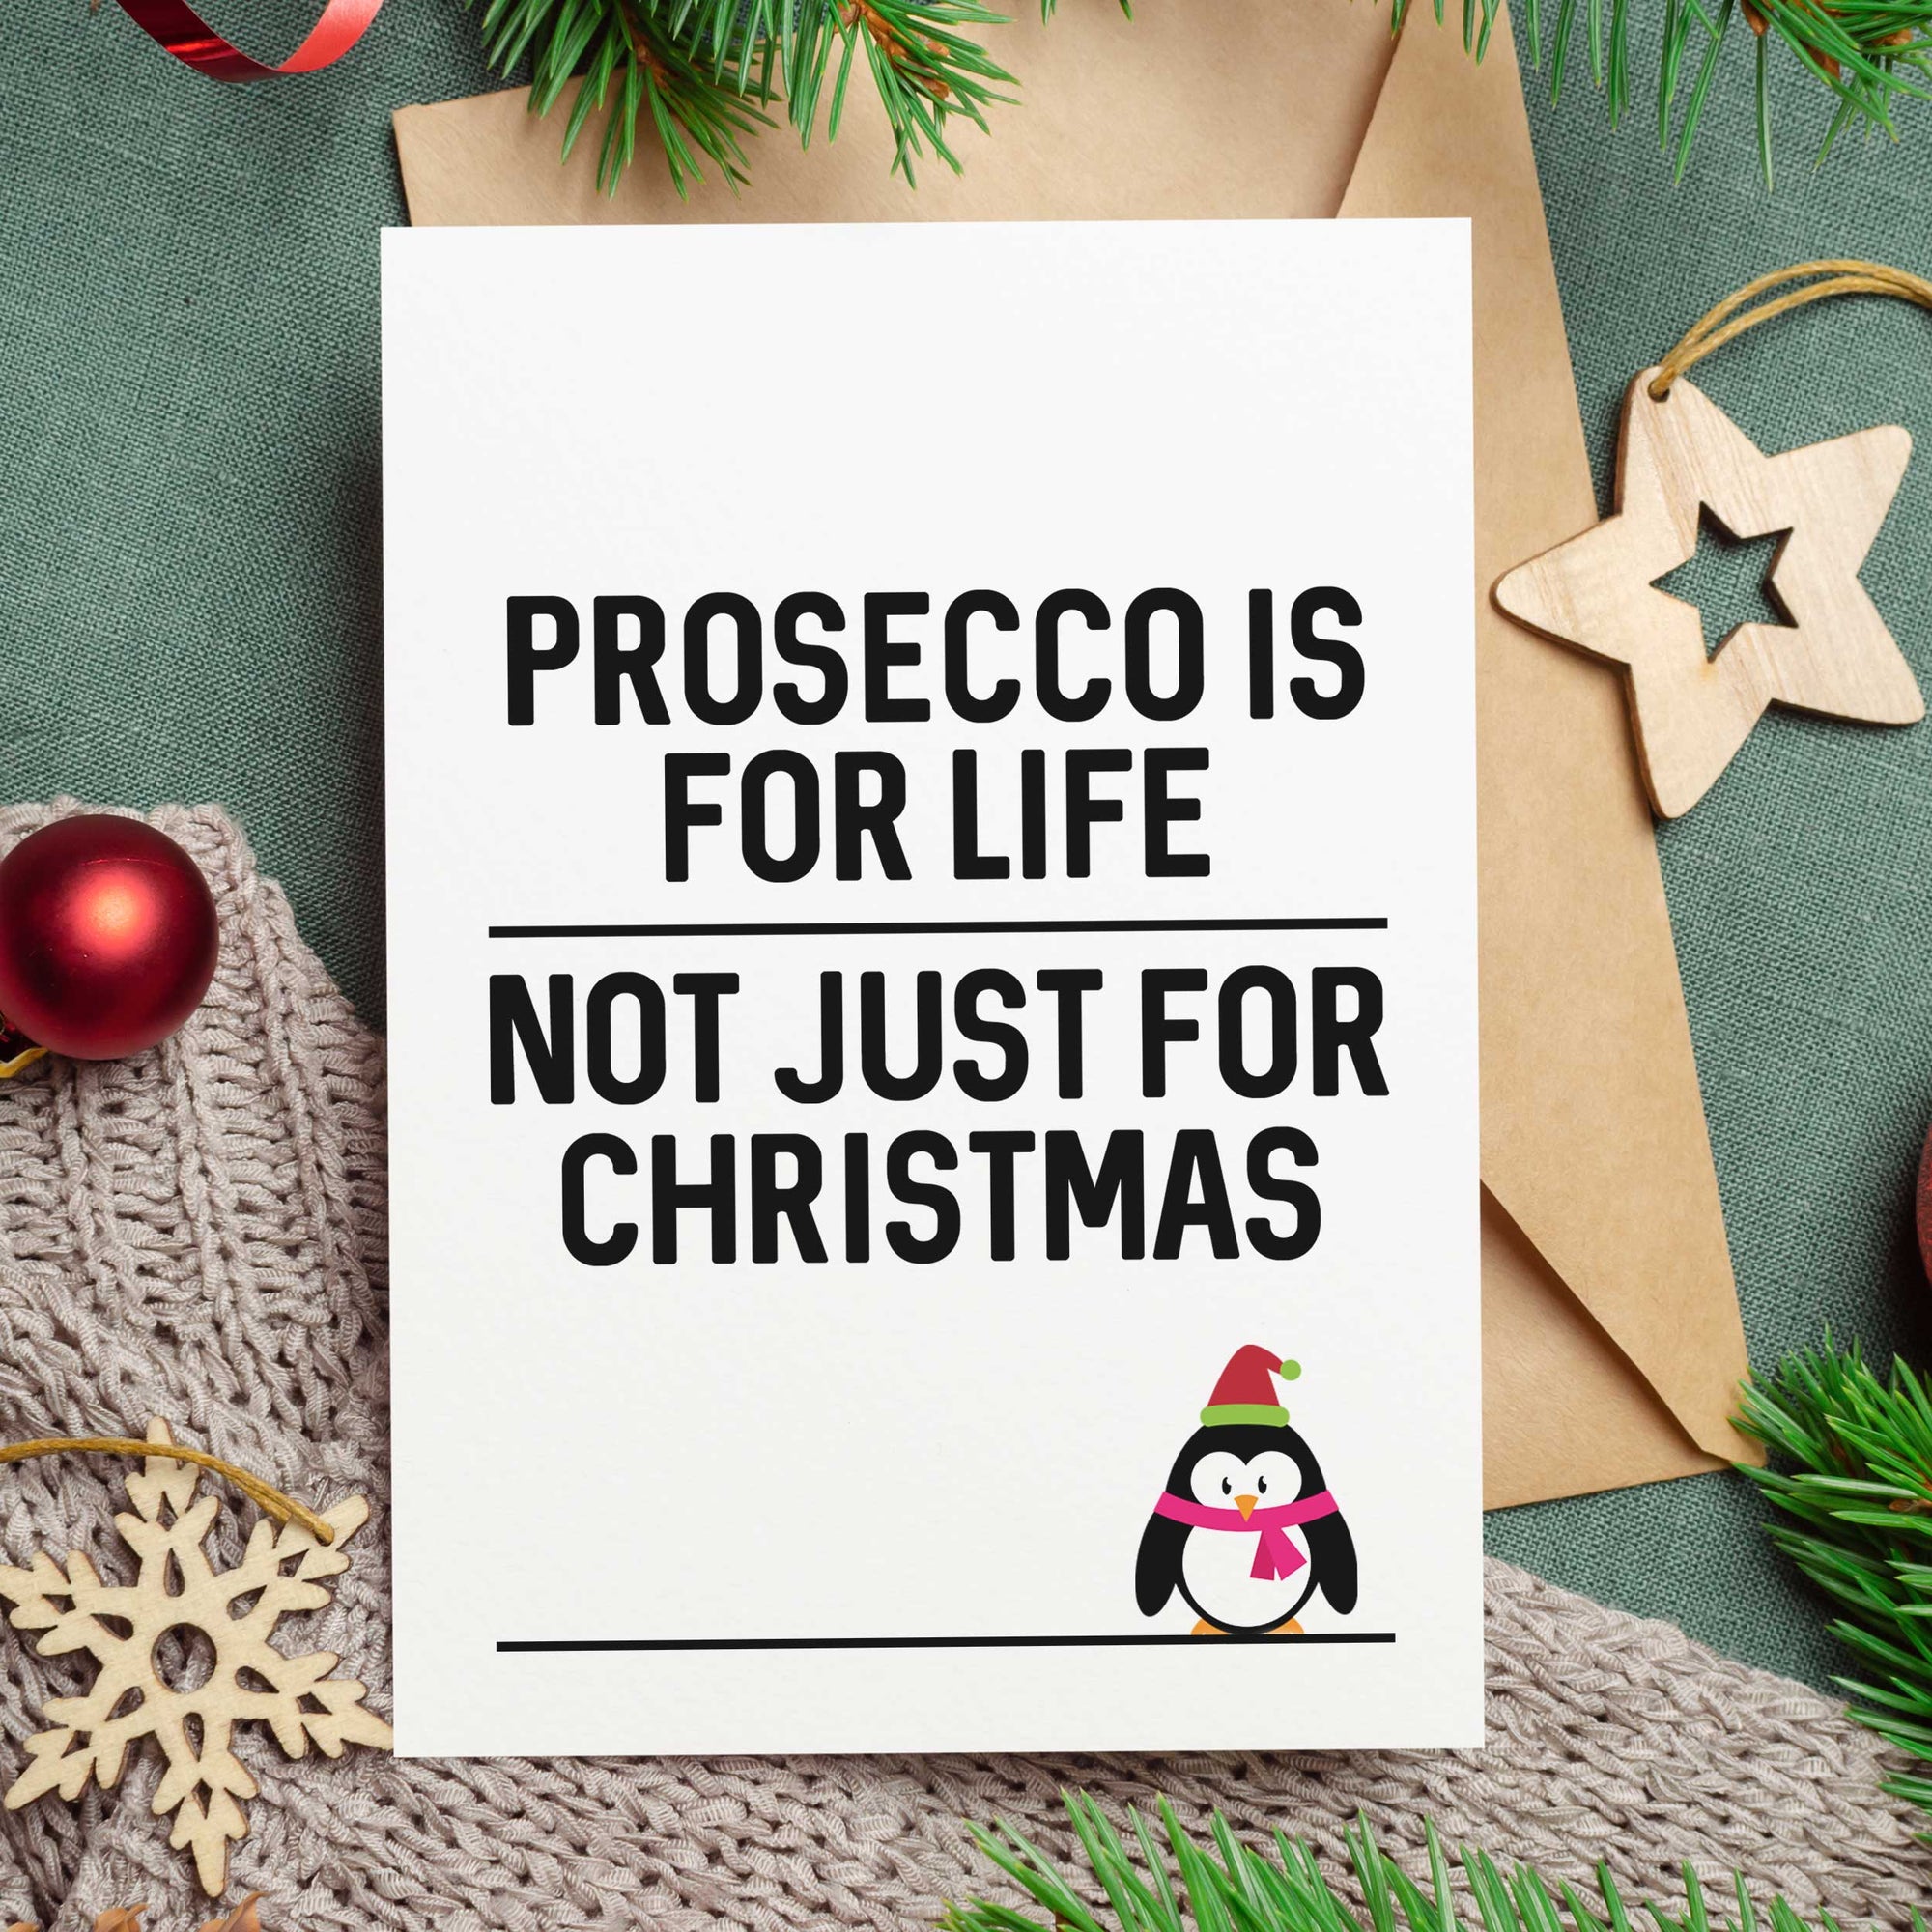 Prosecco Is For Life Not Just For Christmas - Christmas Card